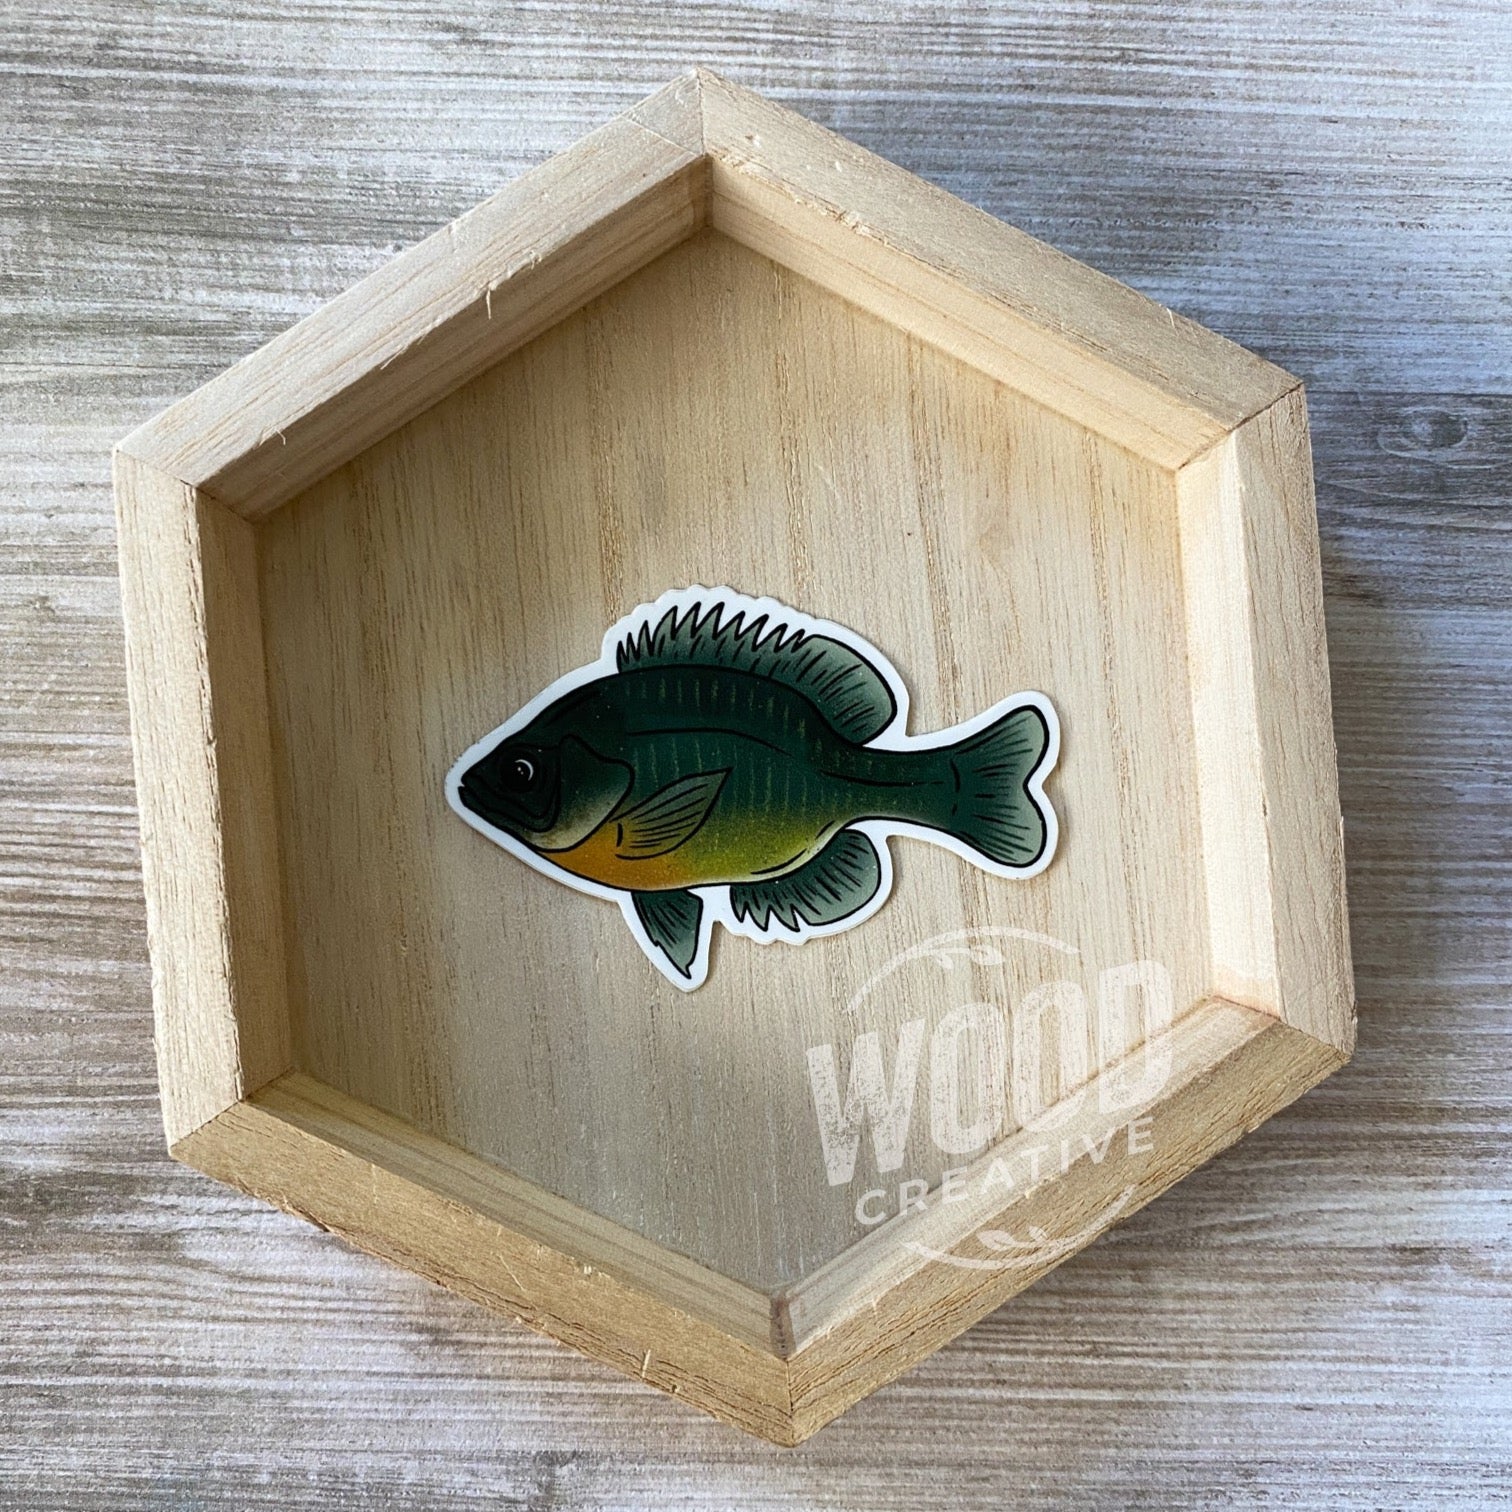 Lake Fish High Quality Vinyl Sticker. A beautiful die-cut sticker that is made from thick, durable vinyl that protects the sticker from scratching, rain & sunlight.